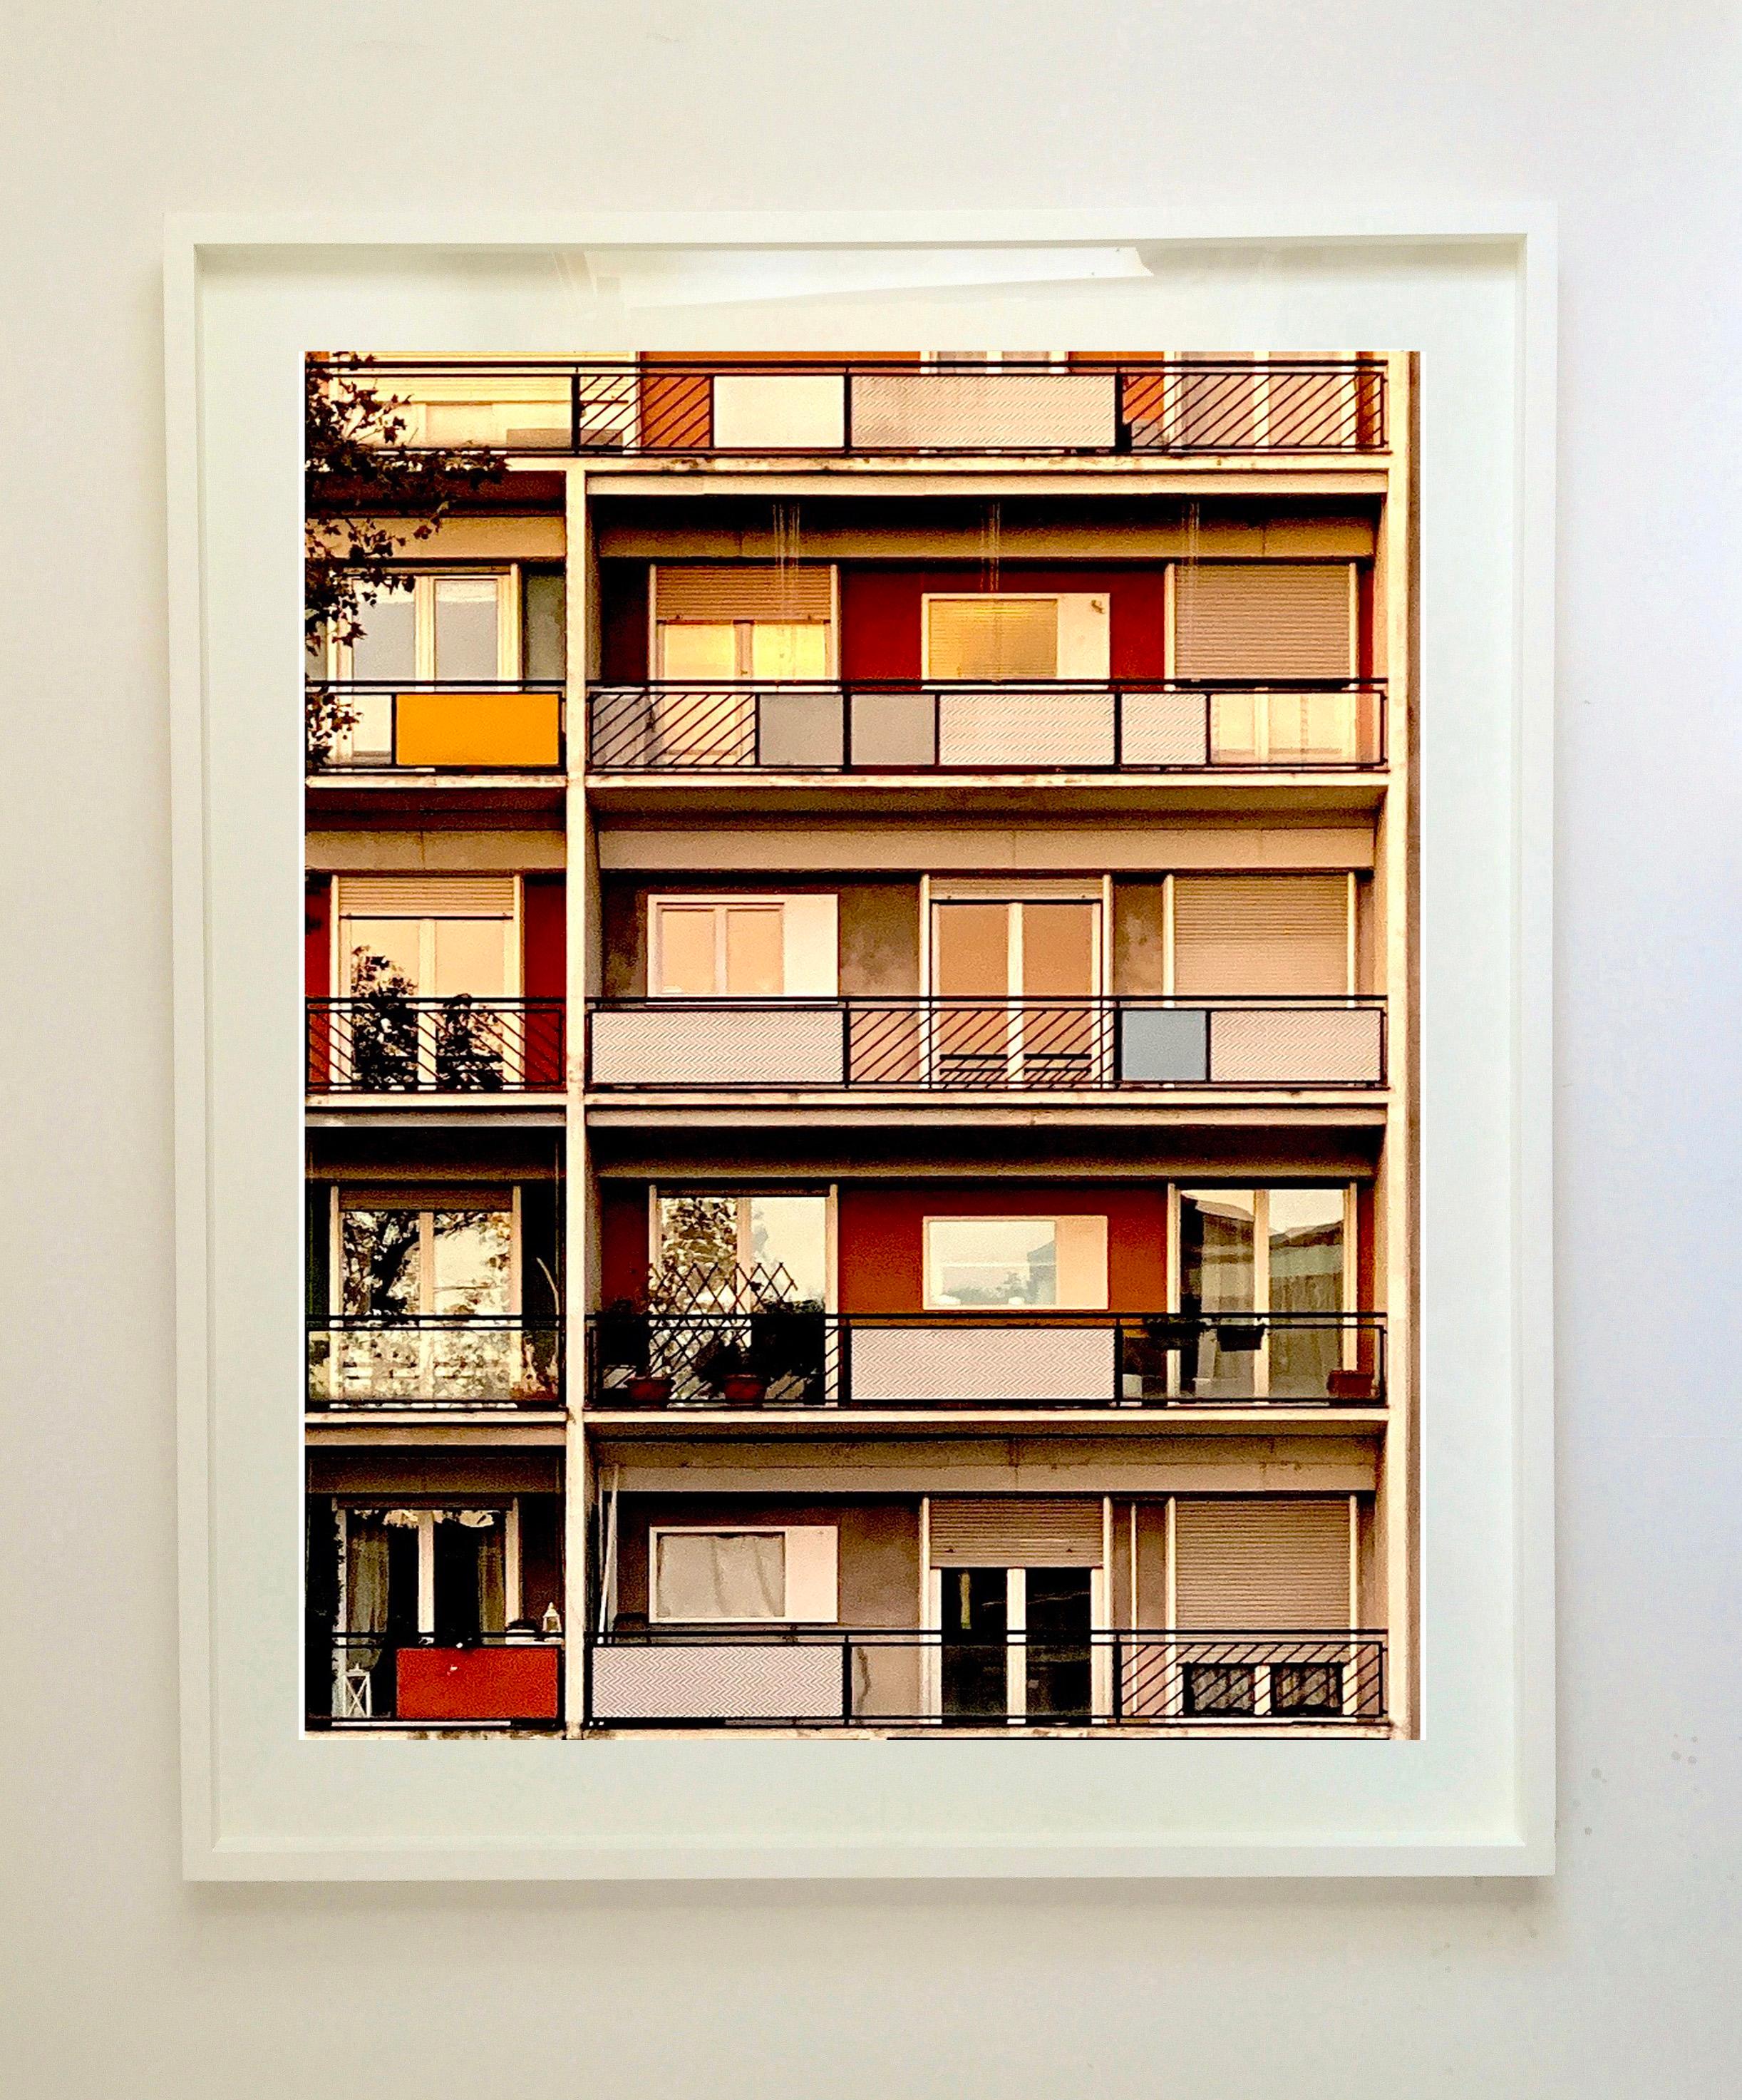 49 Via Dezza, Gio Ponti's iconic Milanese apartments, captured at sunset, from Richard Heeps series A Short History of Milan began as a special project for the 2018 Affordable Art Fair Milan. It was well received and the artwork has become popular